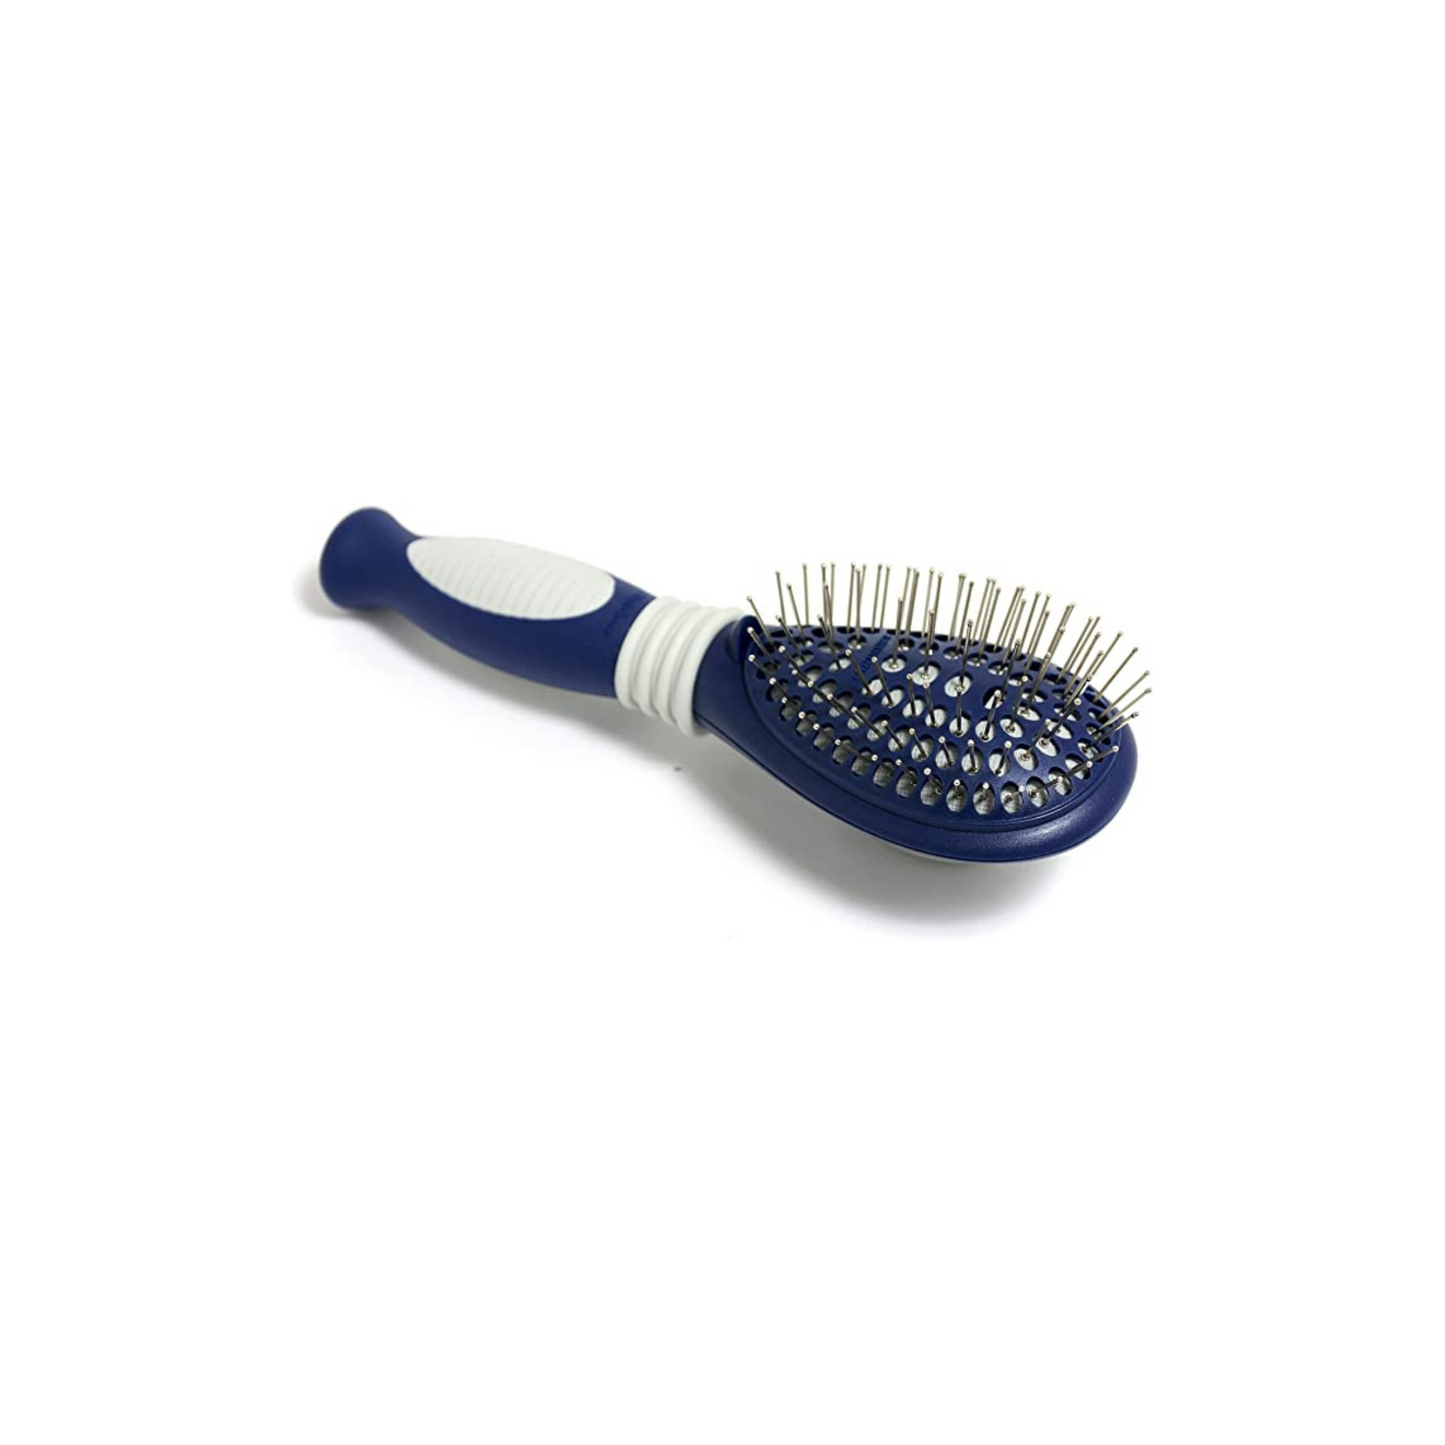 Four Paws Magic Coat Self-Cleaning Dog Grooming  Pin Brush